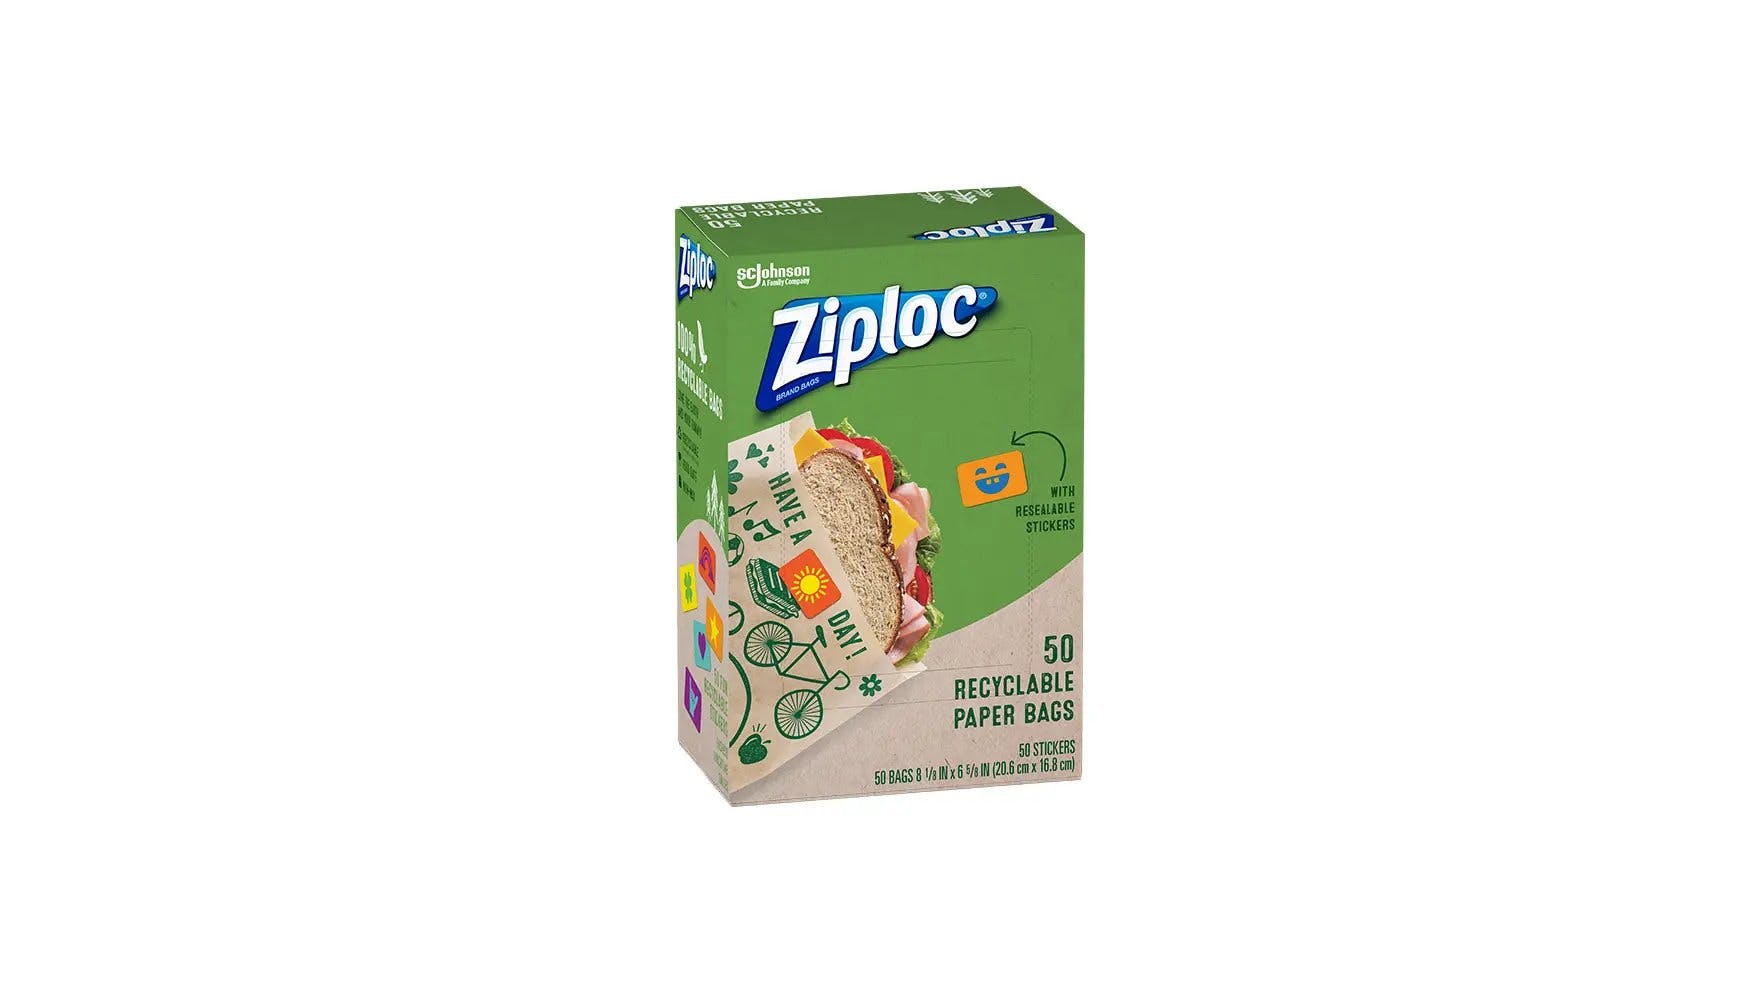 Angle of Ziploc recyclable paper bags box.